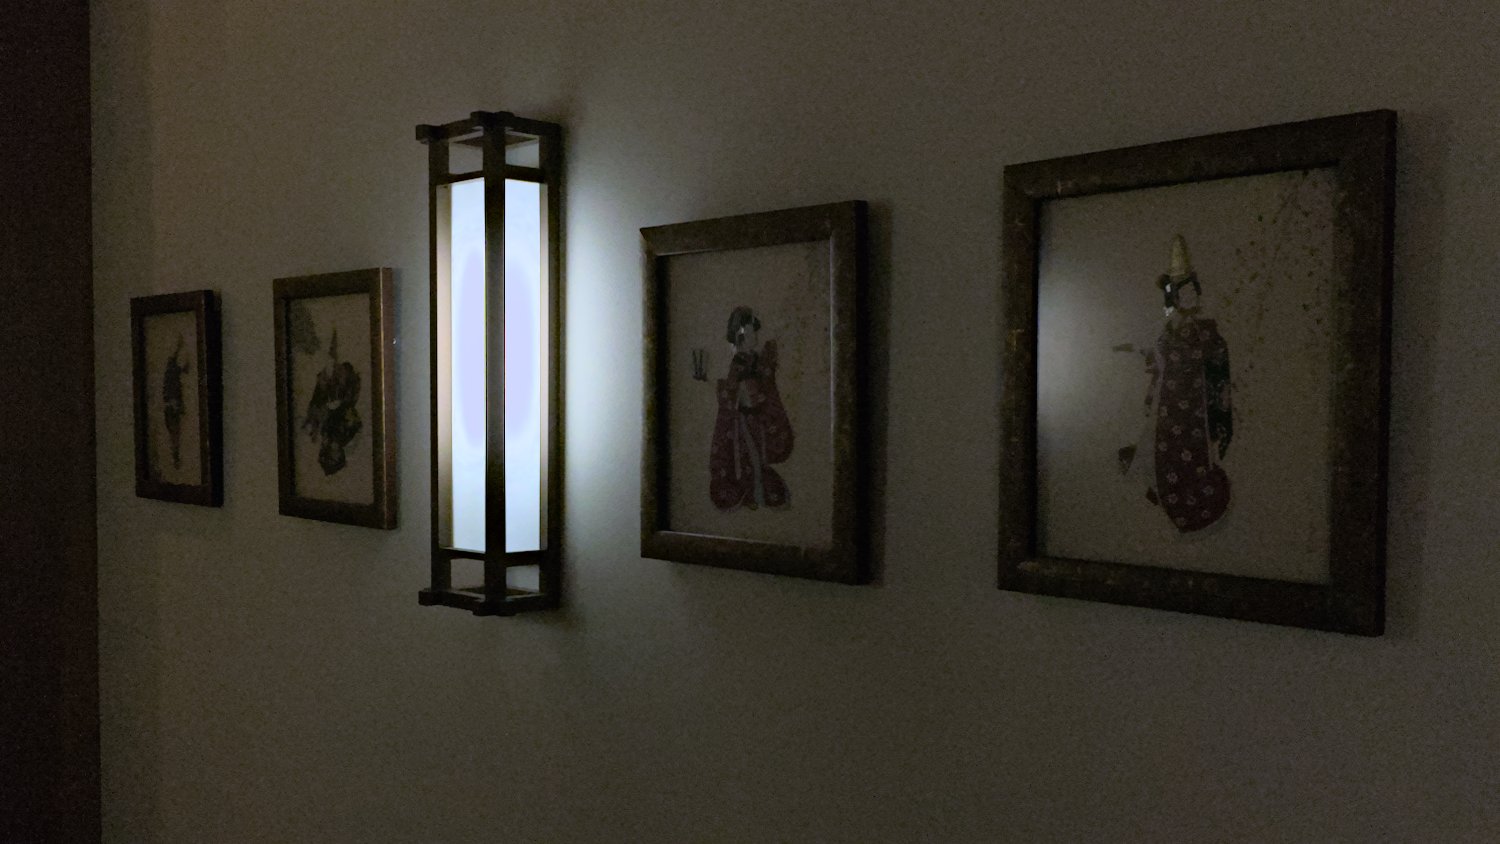 Wall sconce and Japanese wall art.